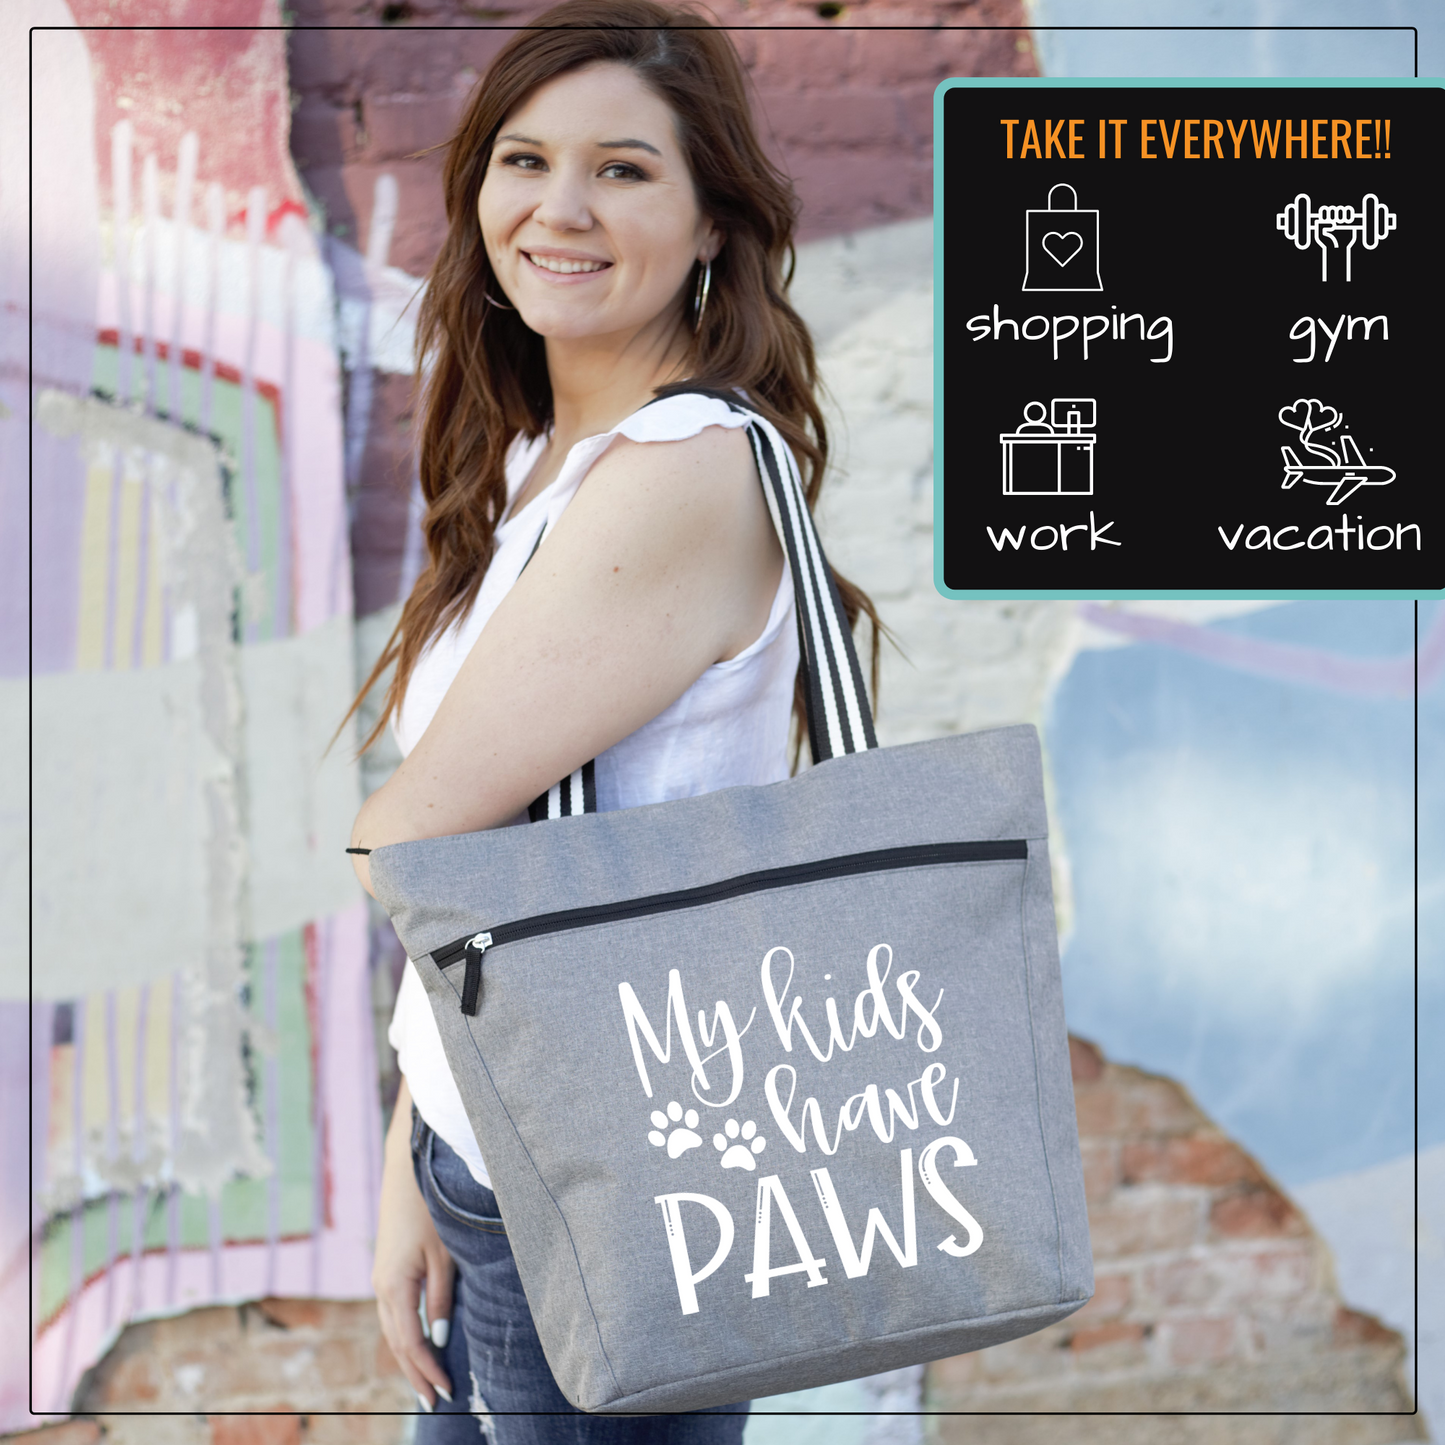 My Kids Have Paws Lexie  Gray Tote Bag for Pet Lovers